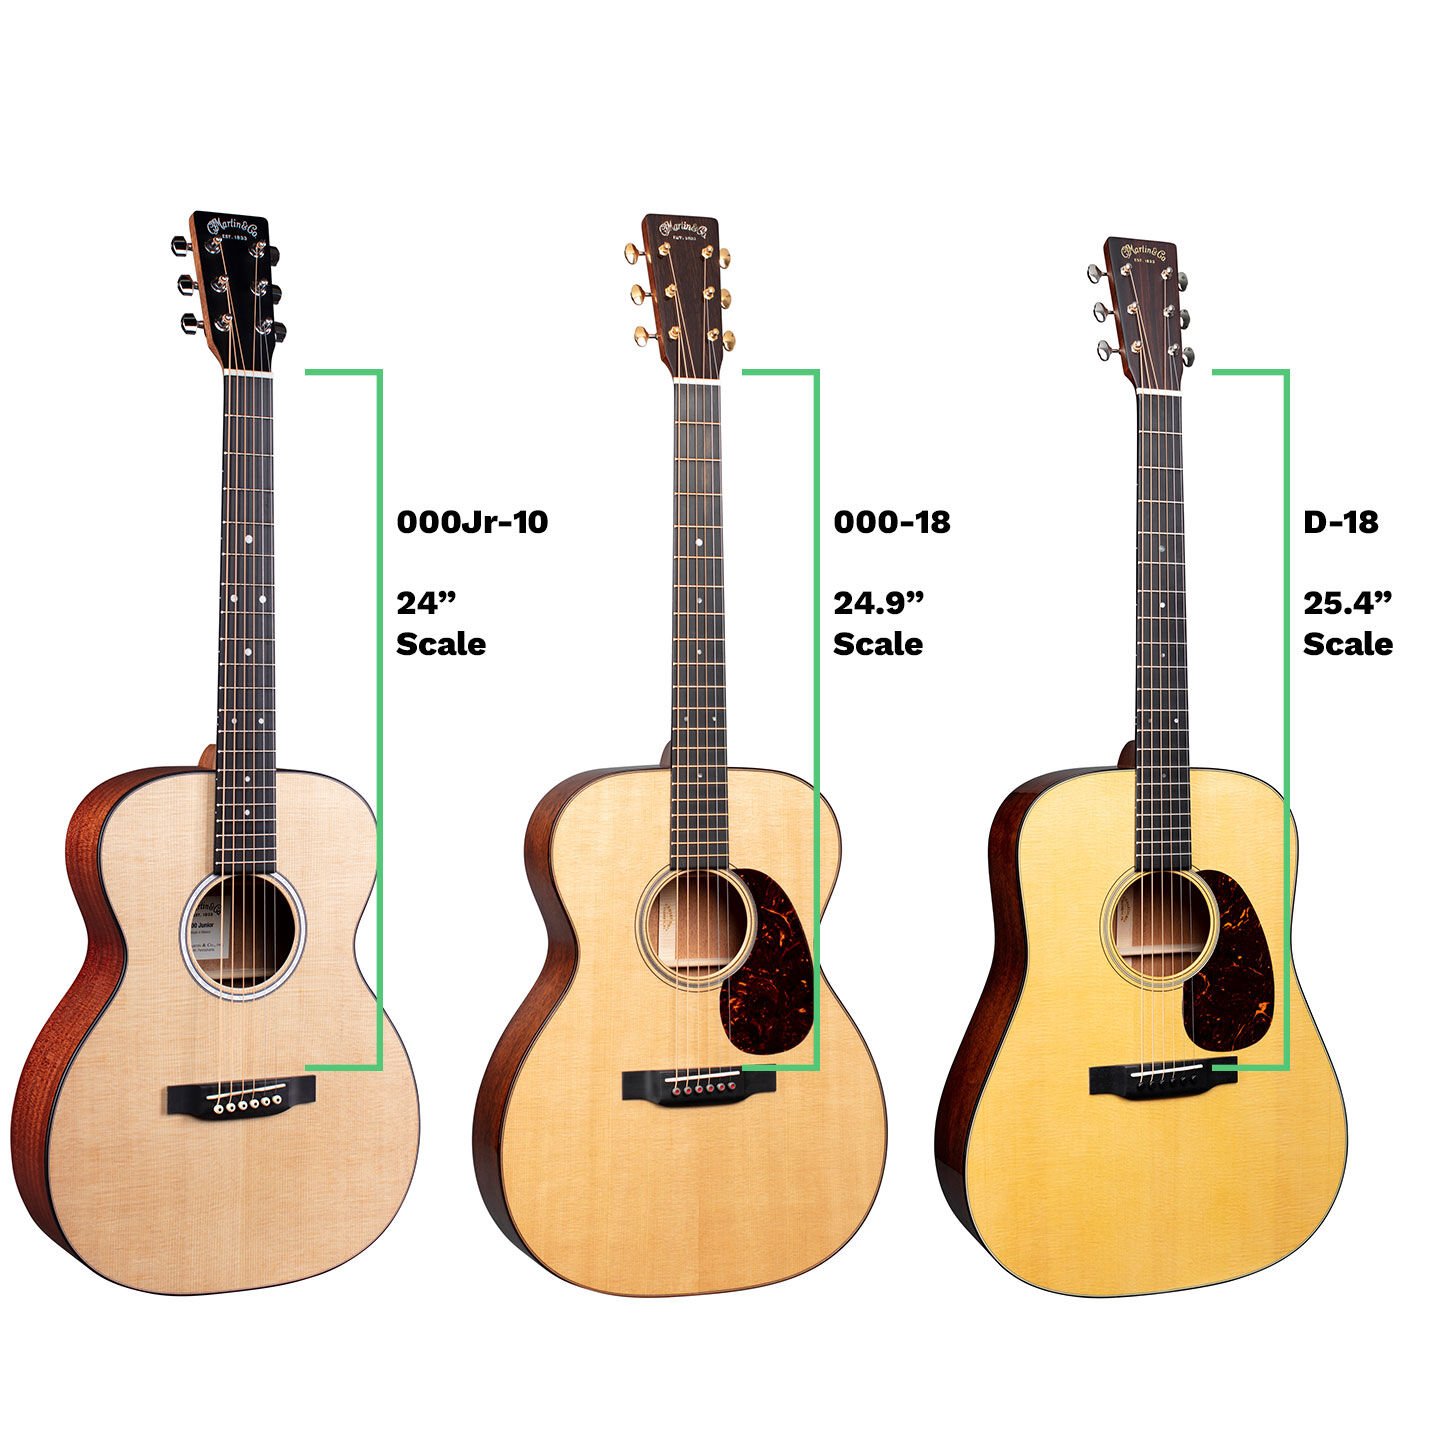 Infographic of guitar scale length